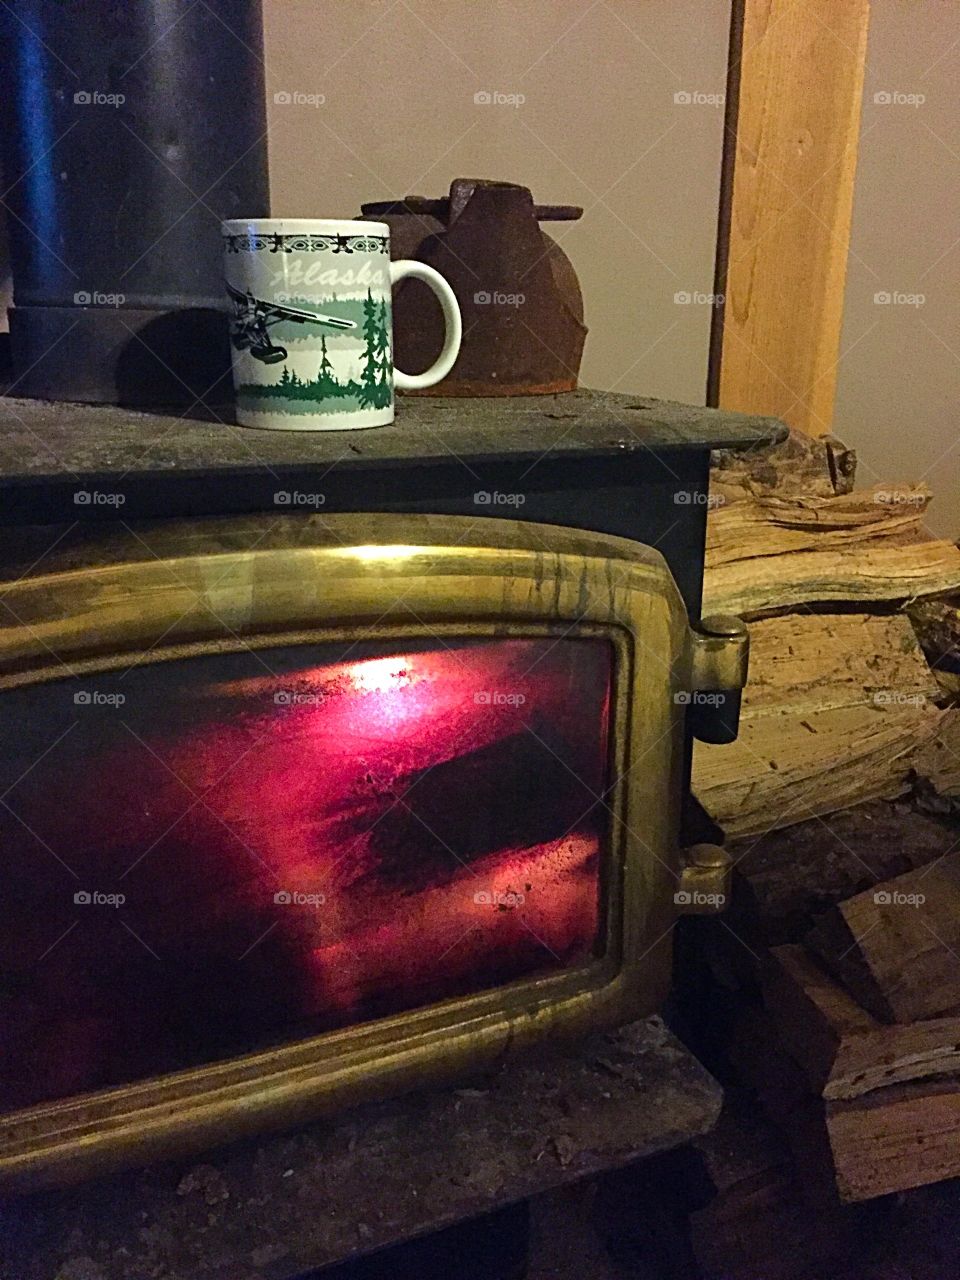 Some coffee on the wood stove